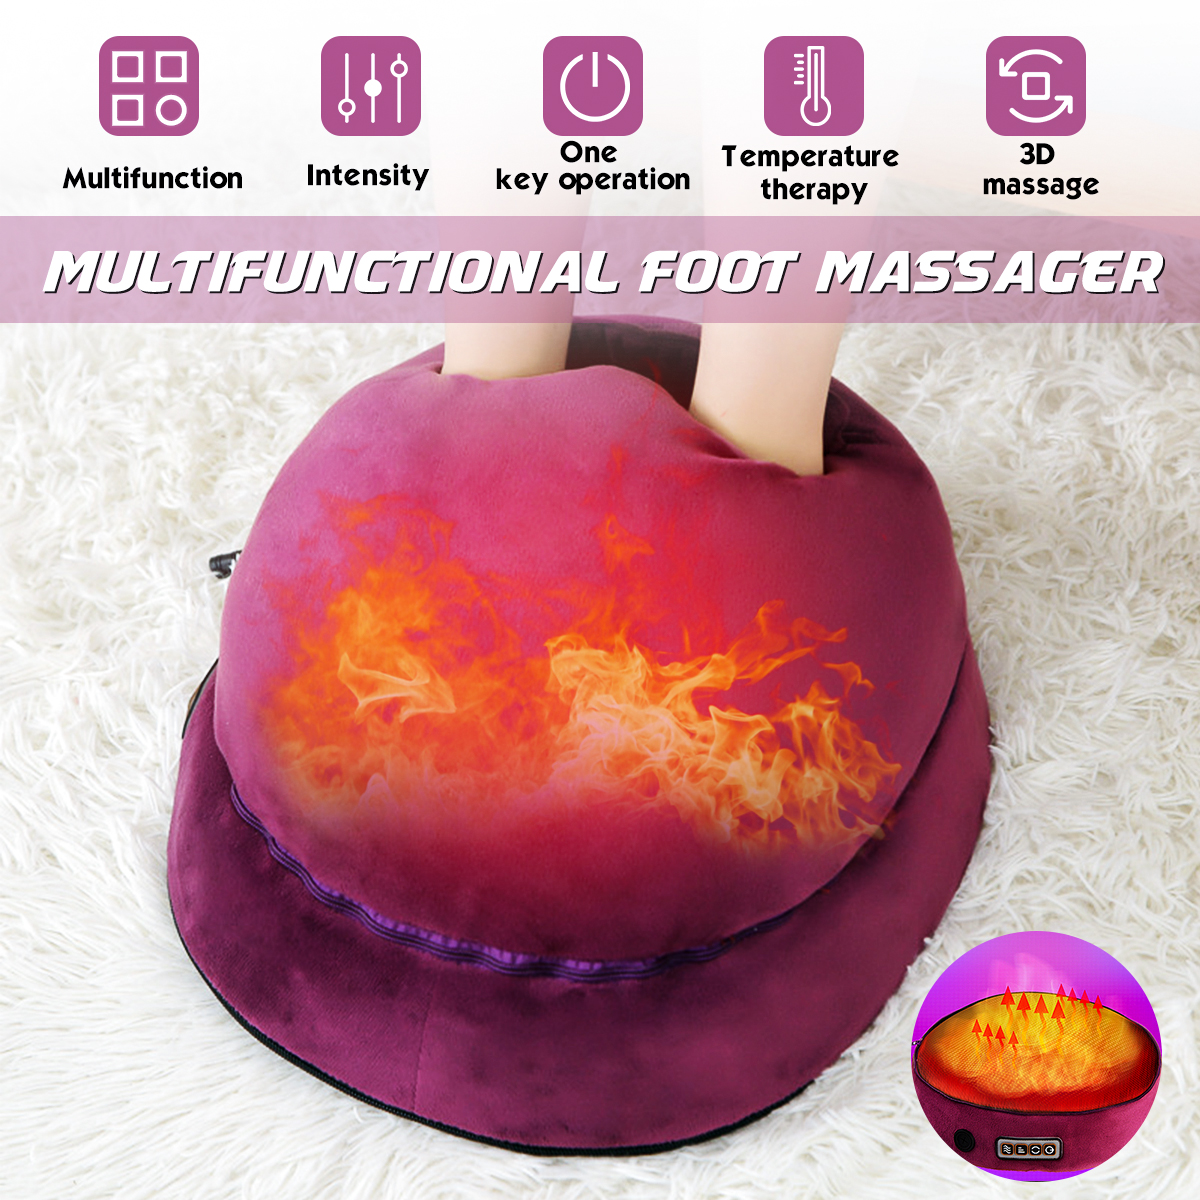 Multifunctional-3D-Foot-Massager-Three-level-Strength-Adjustment-Temperature-Therapy-Foot-Massager-S-1937559-1